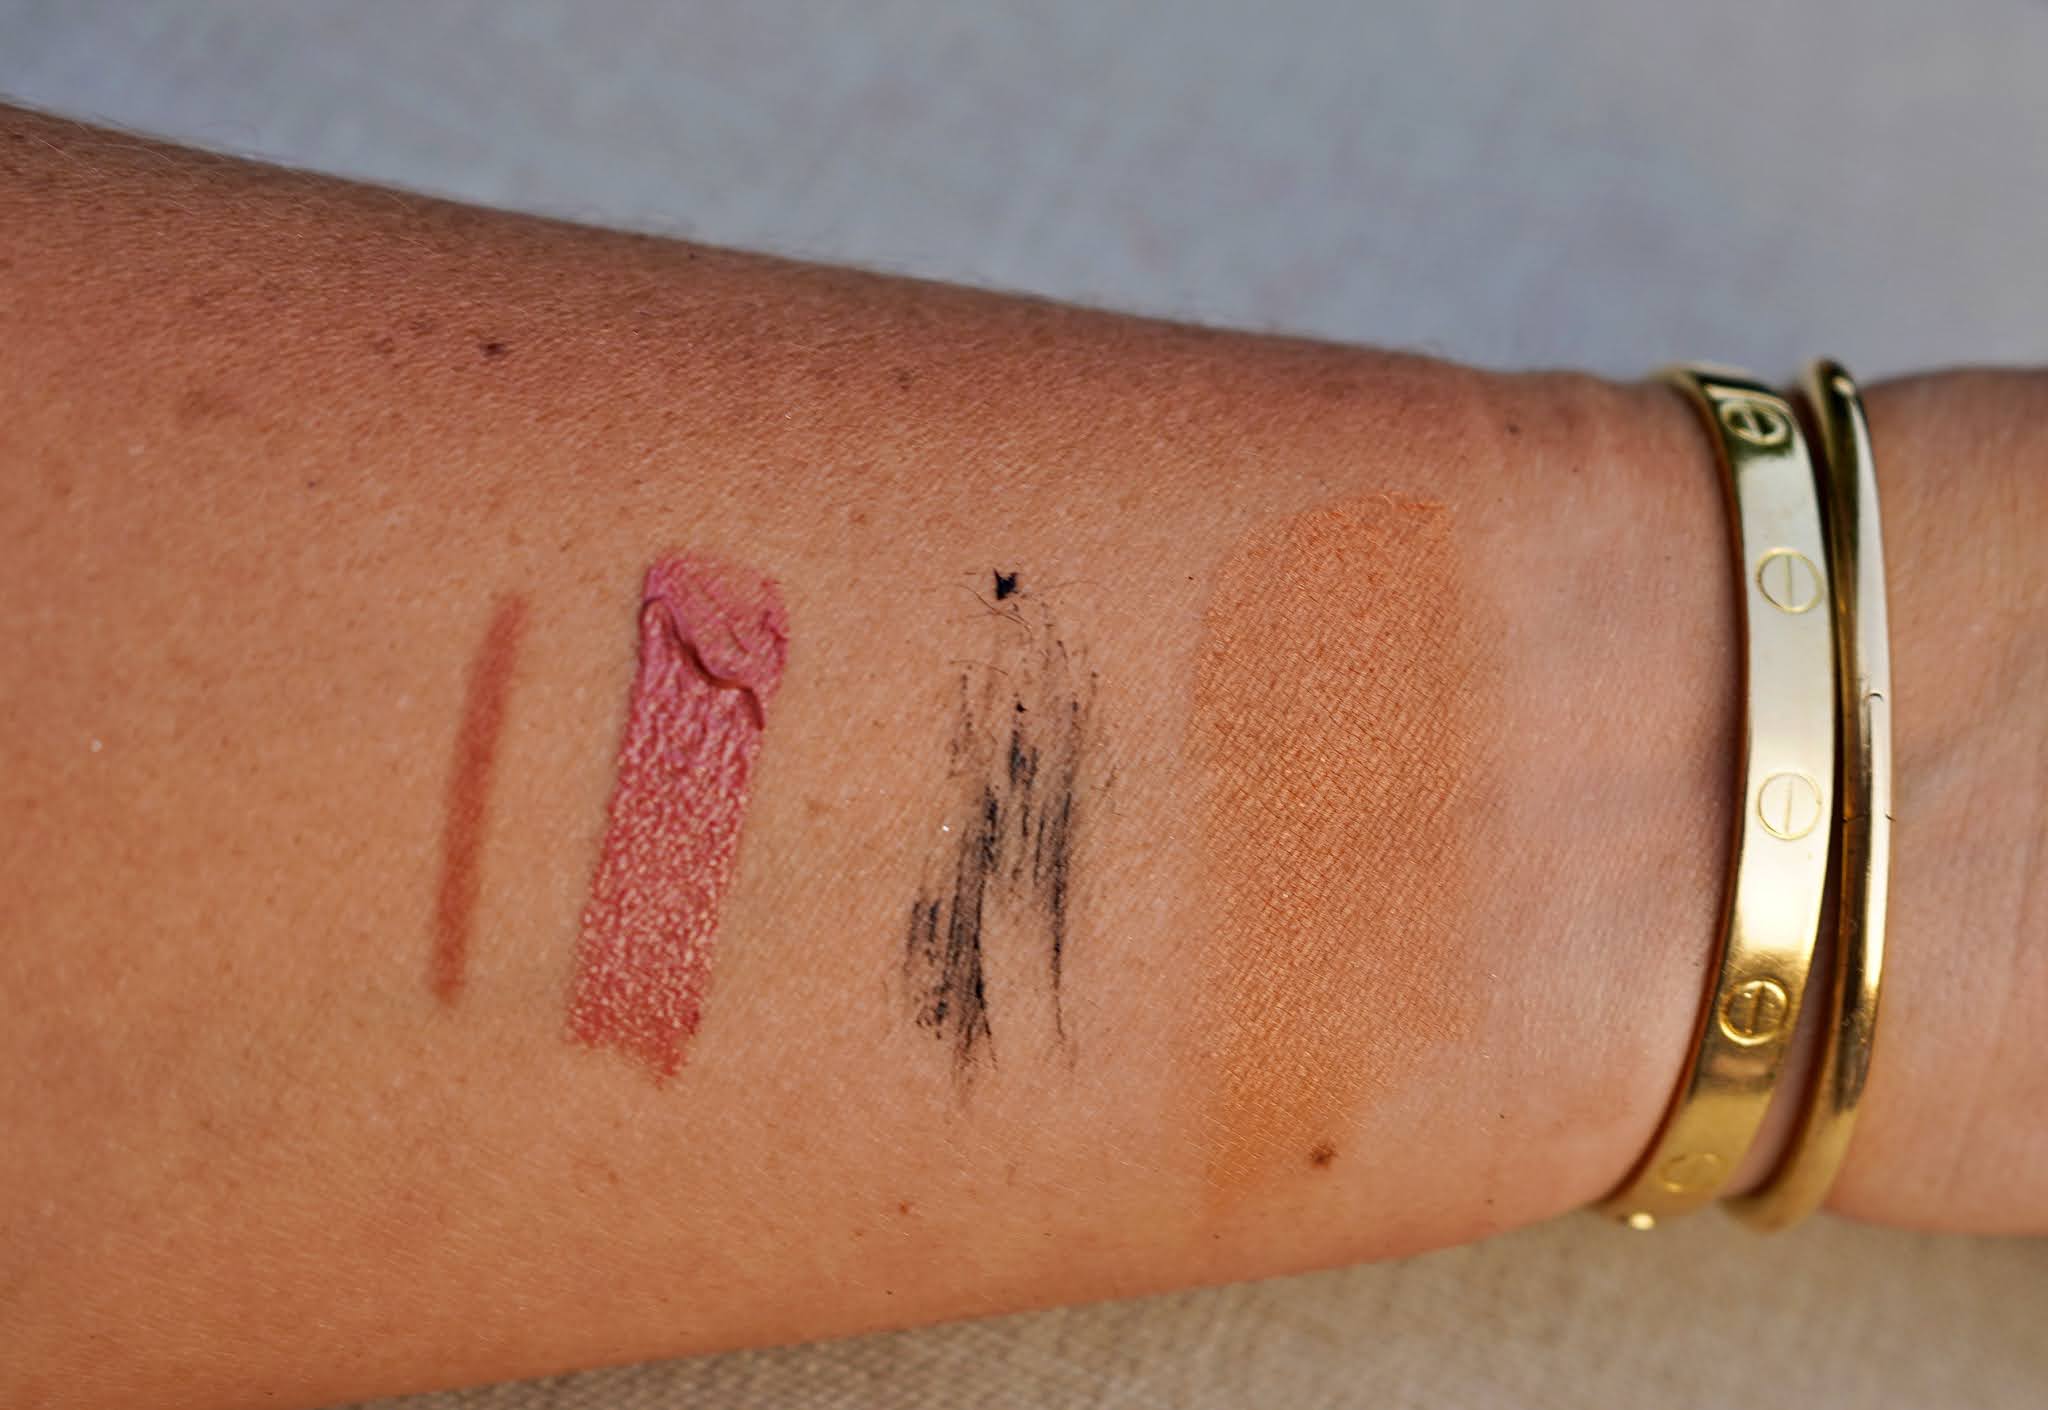 EM Cosmetics makeup for end of October swatch